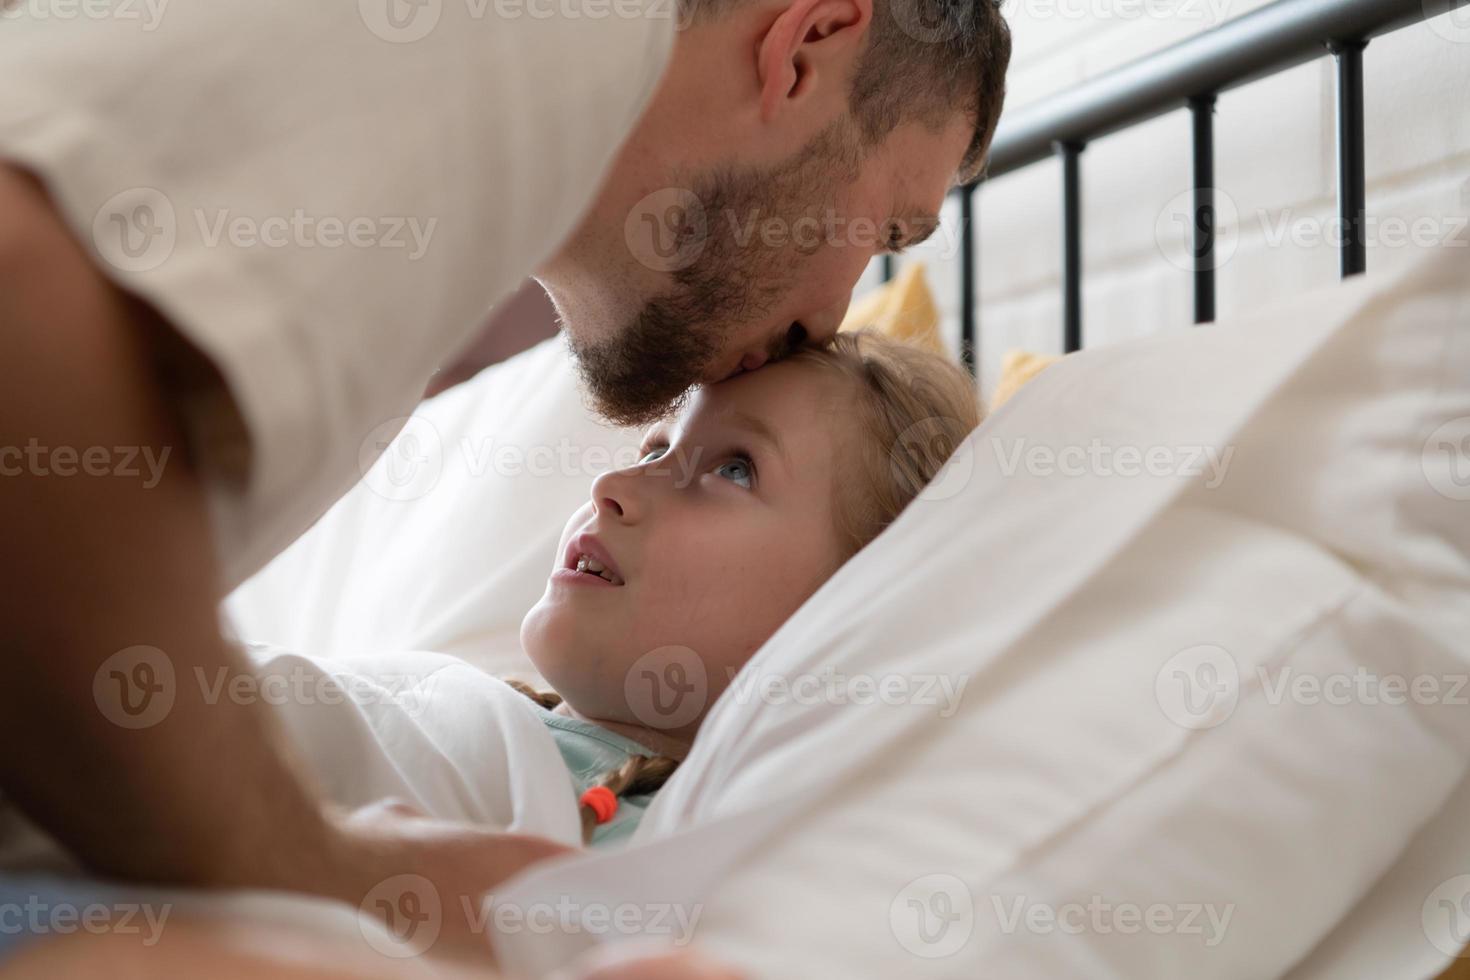 Before retiring to night, a father expresses his affection by kissing his daughter on the forehead. to get a good night's rest photo